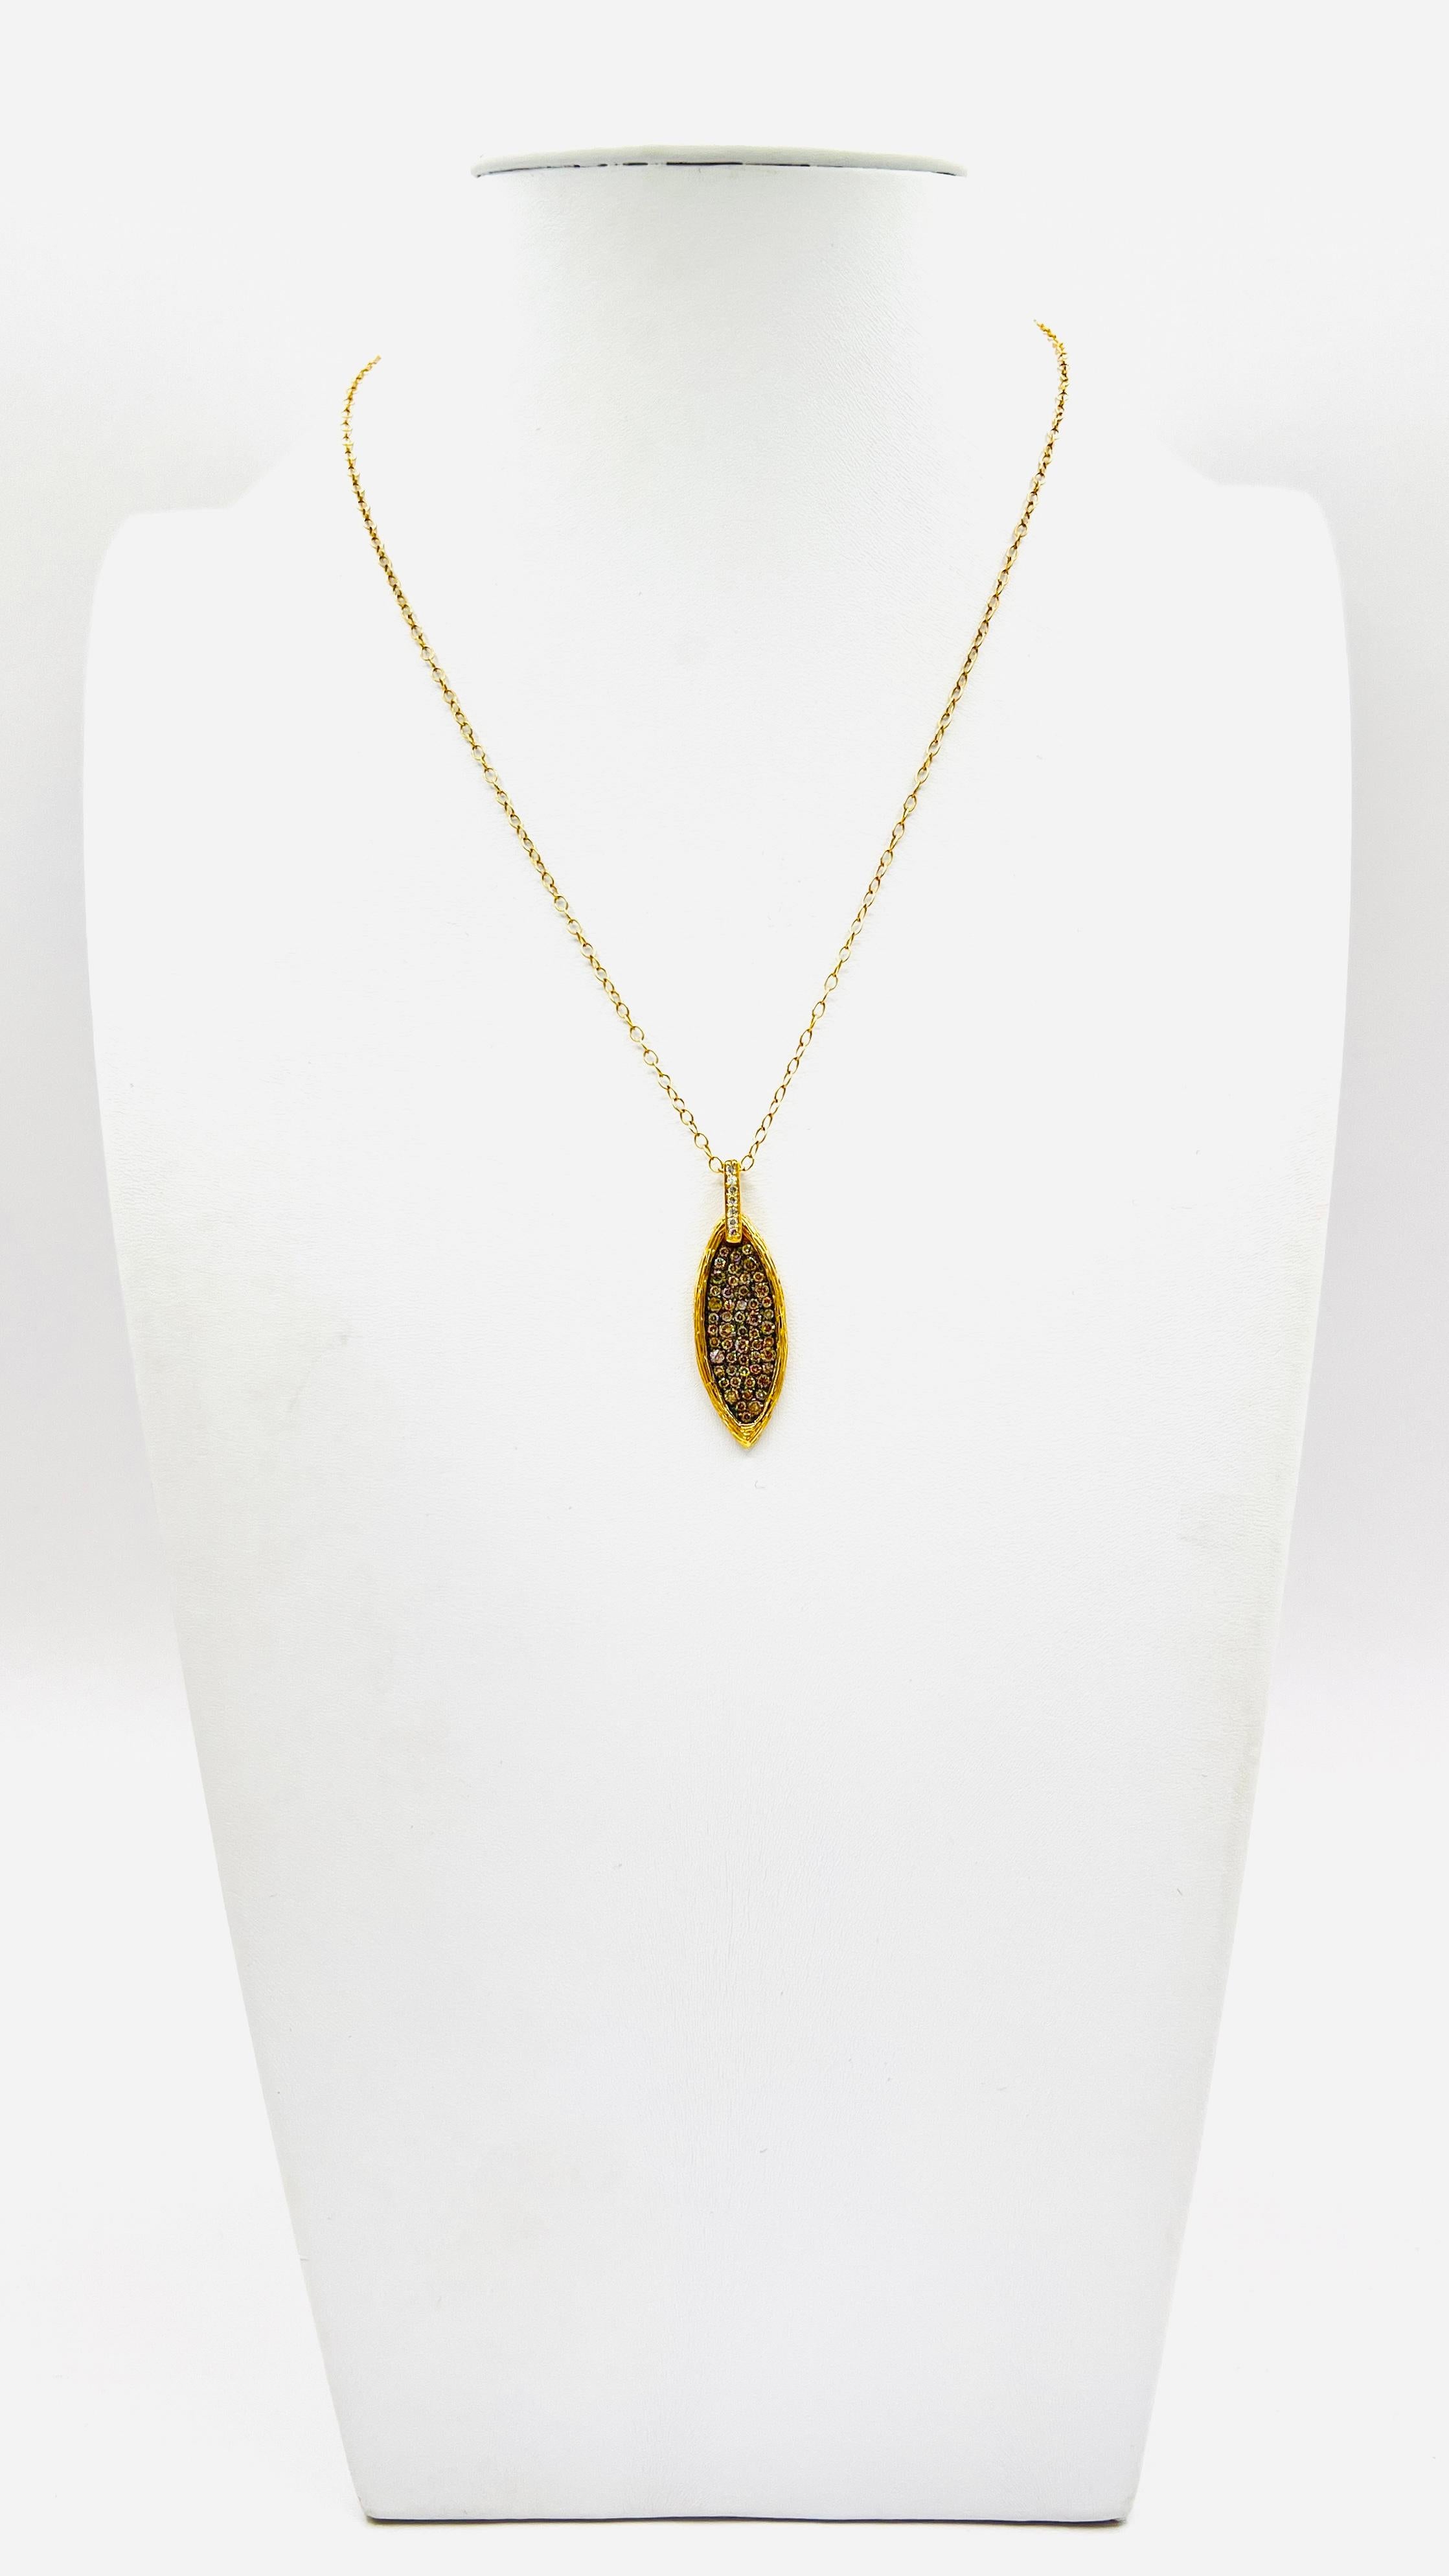 Brown and White Diamond Leaf Design Pendant Necklace in 14K Yellow Gold For Sale 3